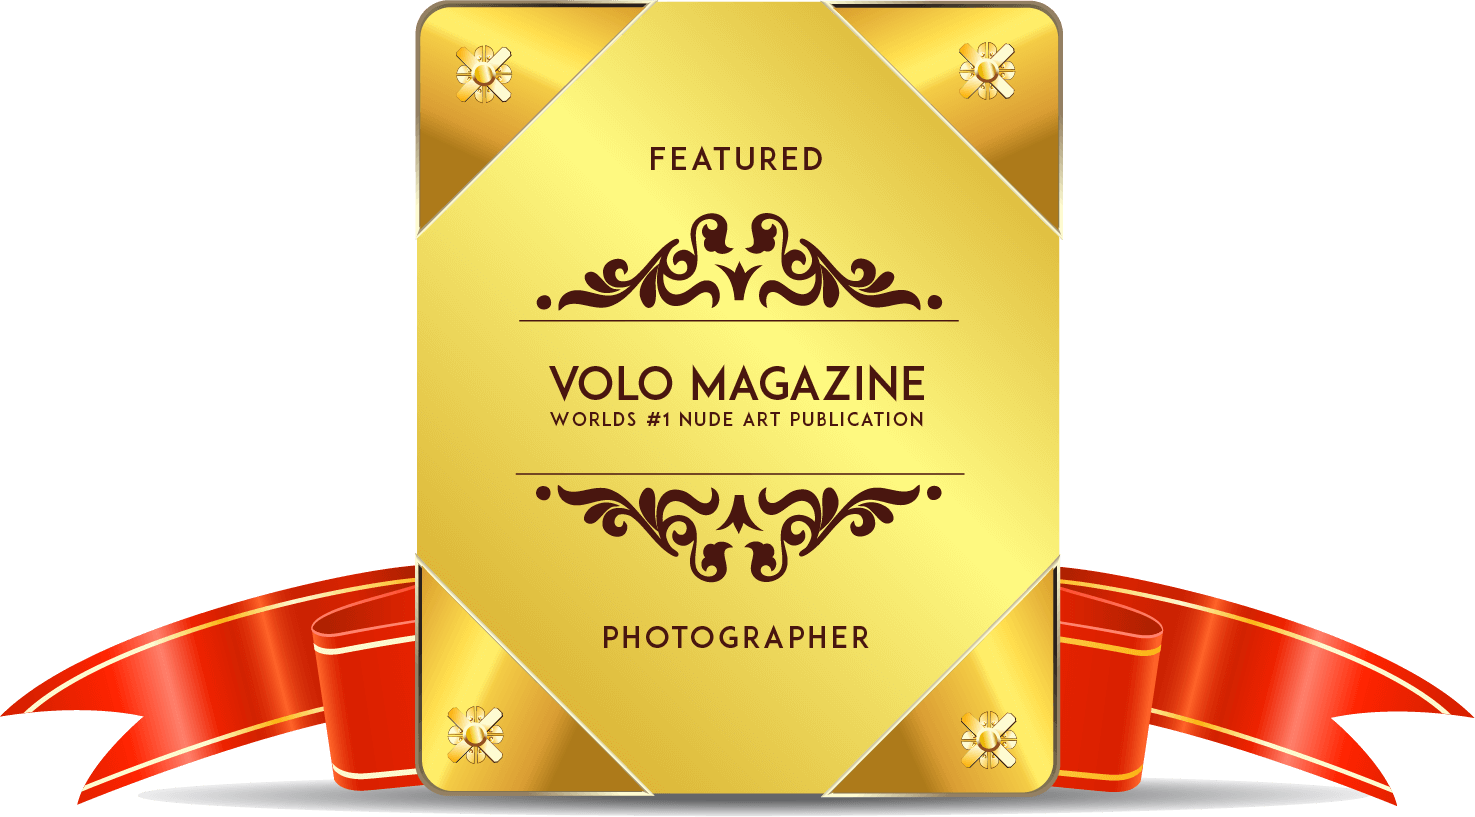 Featured-On-VOLO-Magazine@2x.png